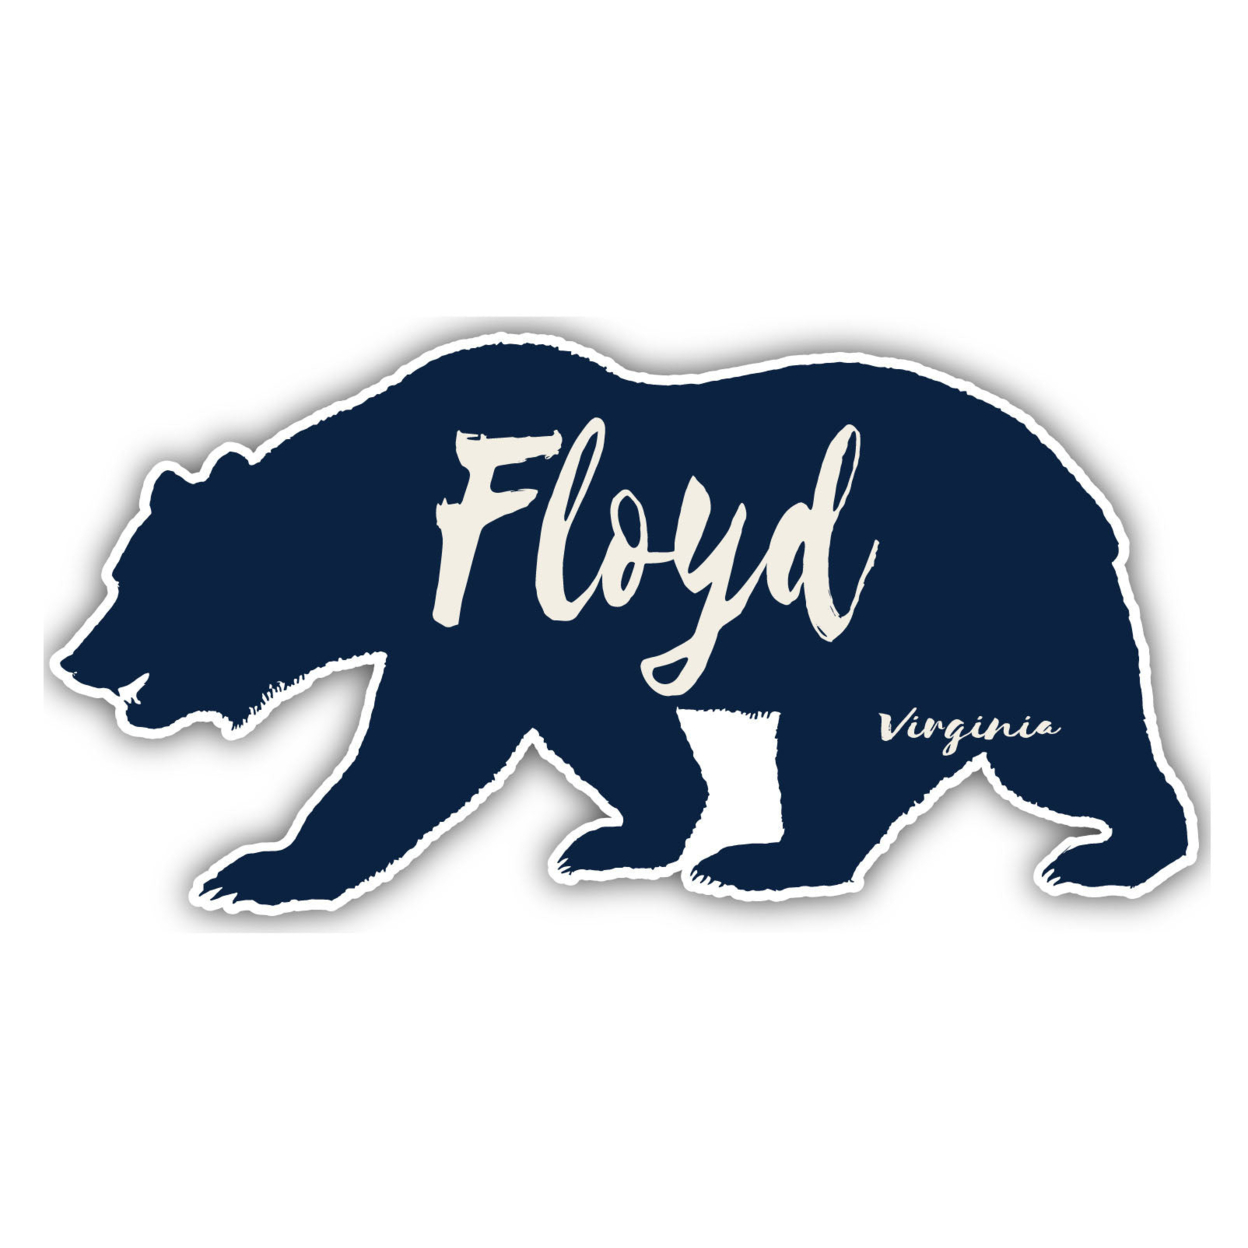 Floyd Virginia Souvenir Decorative Stickers (Choose Theme And Size) - 4-Pack, 6-Inch, Great Outdoors